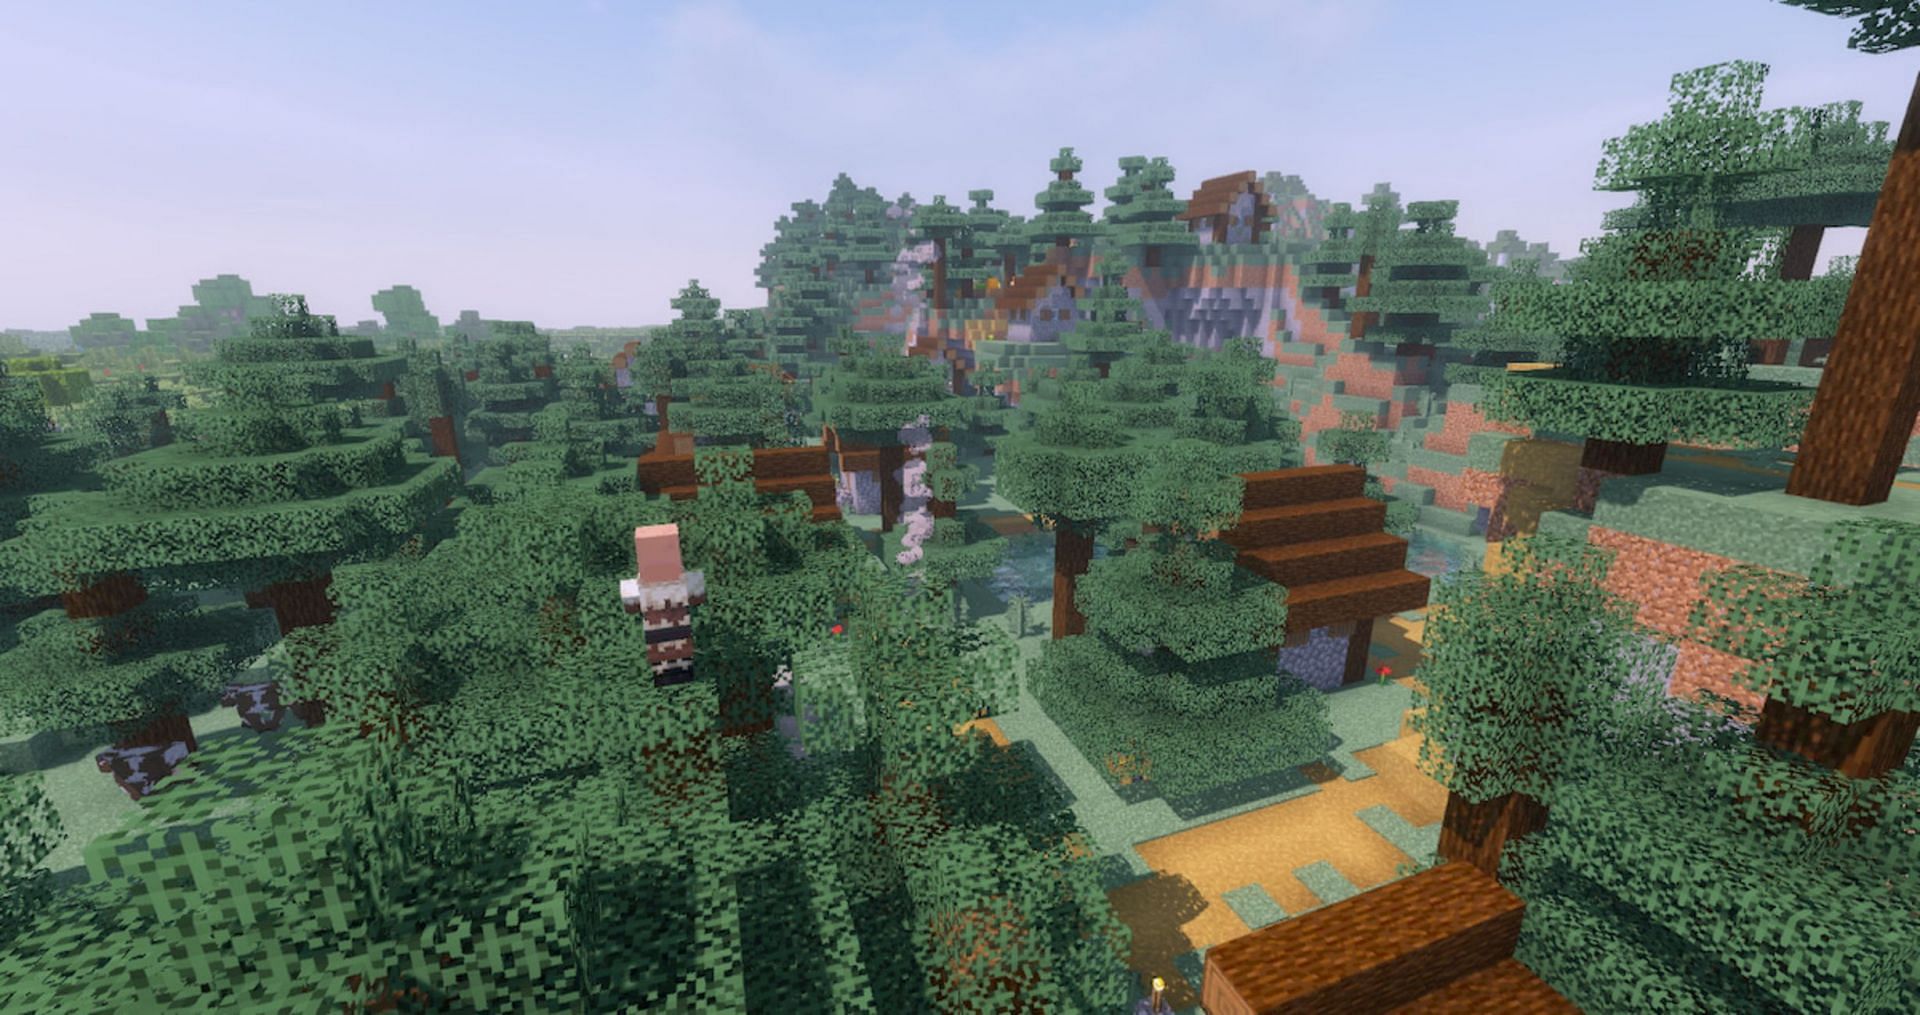 Four blacksmiths provide plenty of materials for players in this seed (Image via Mojang)